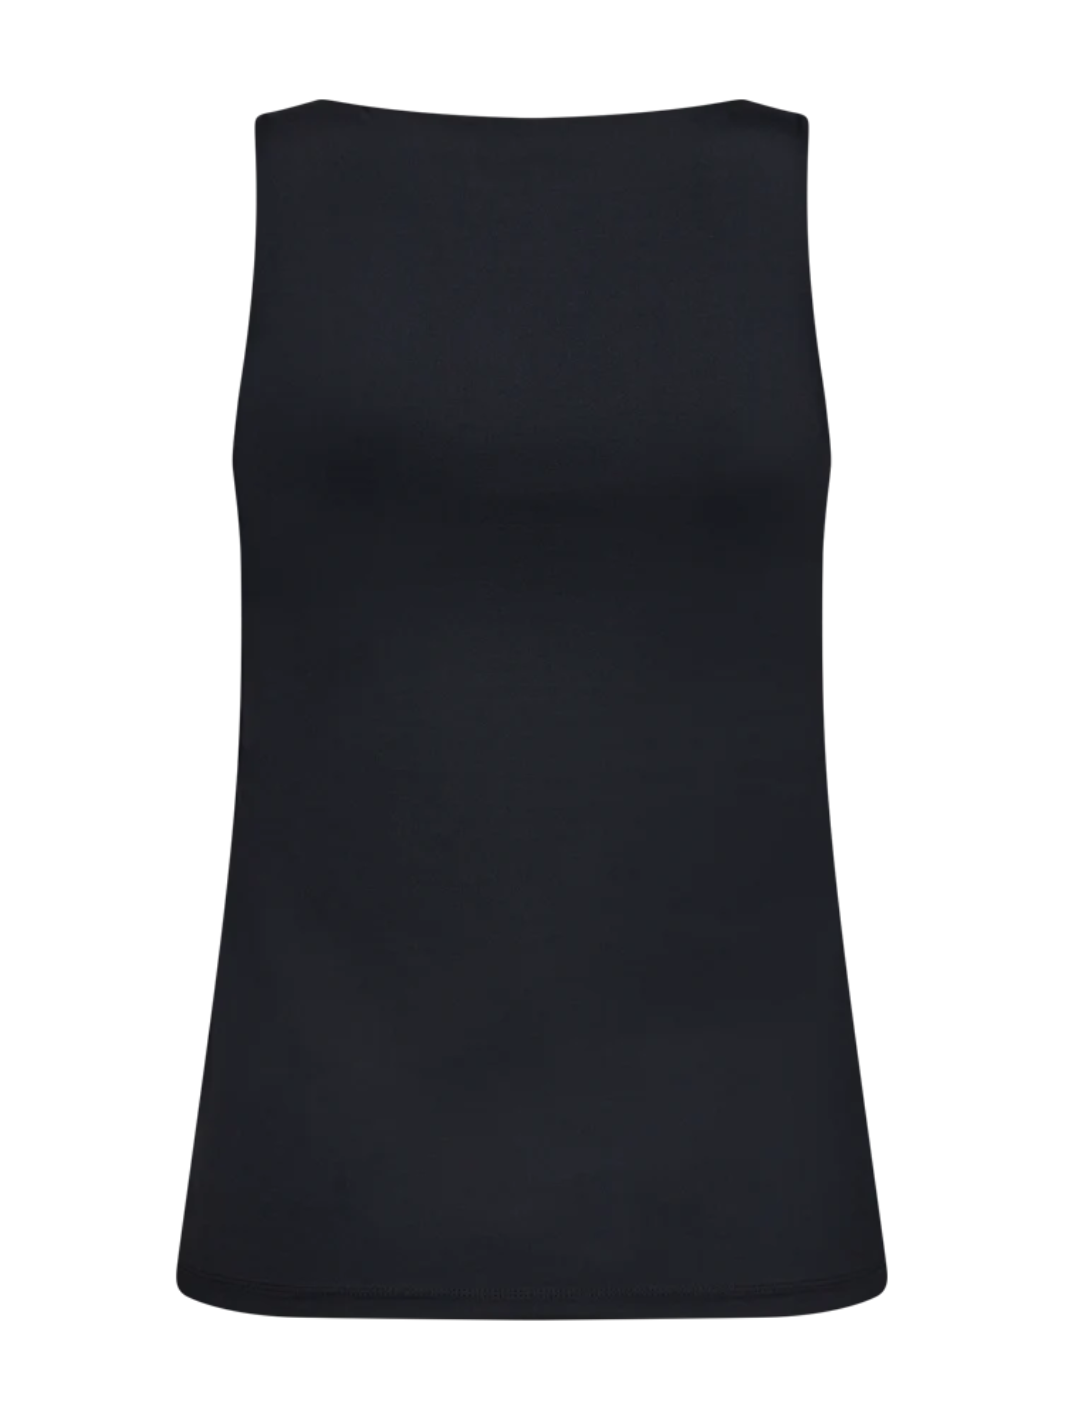 Freequent Cami Top In Black-Nicola Ross